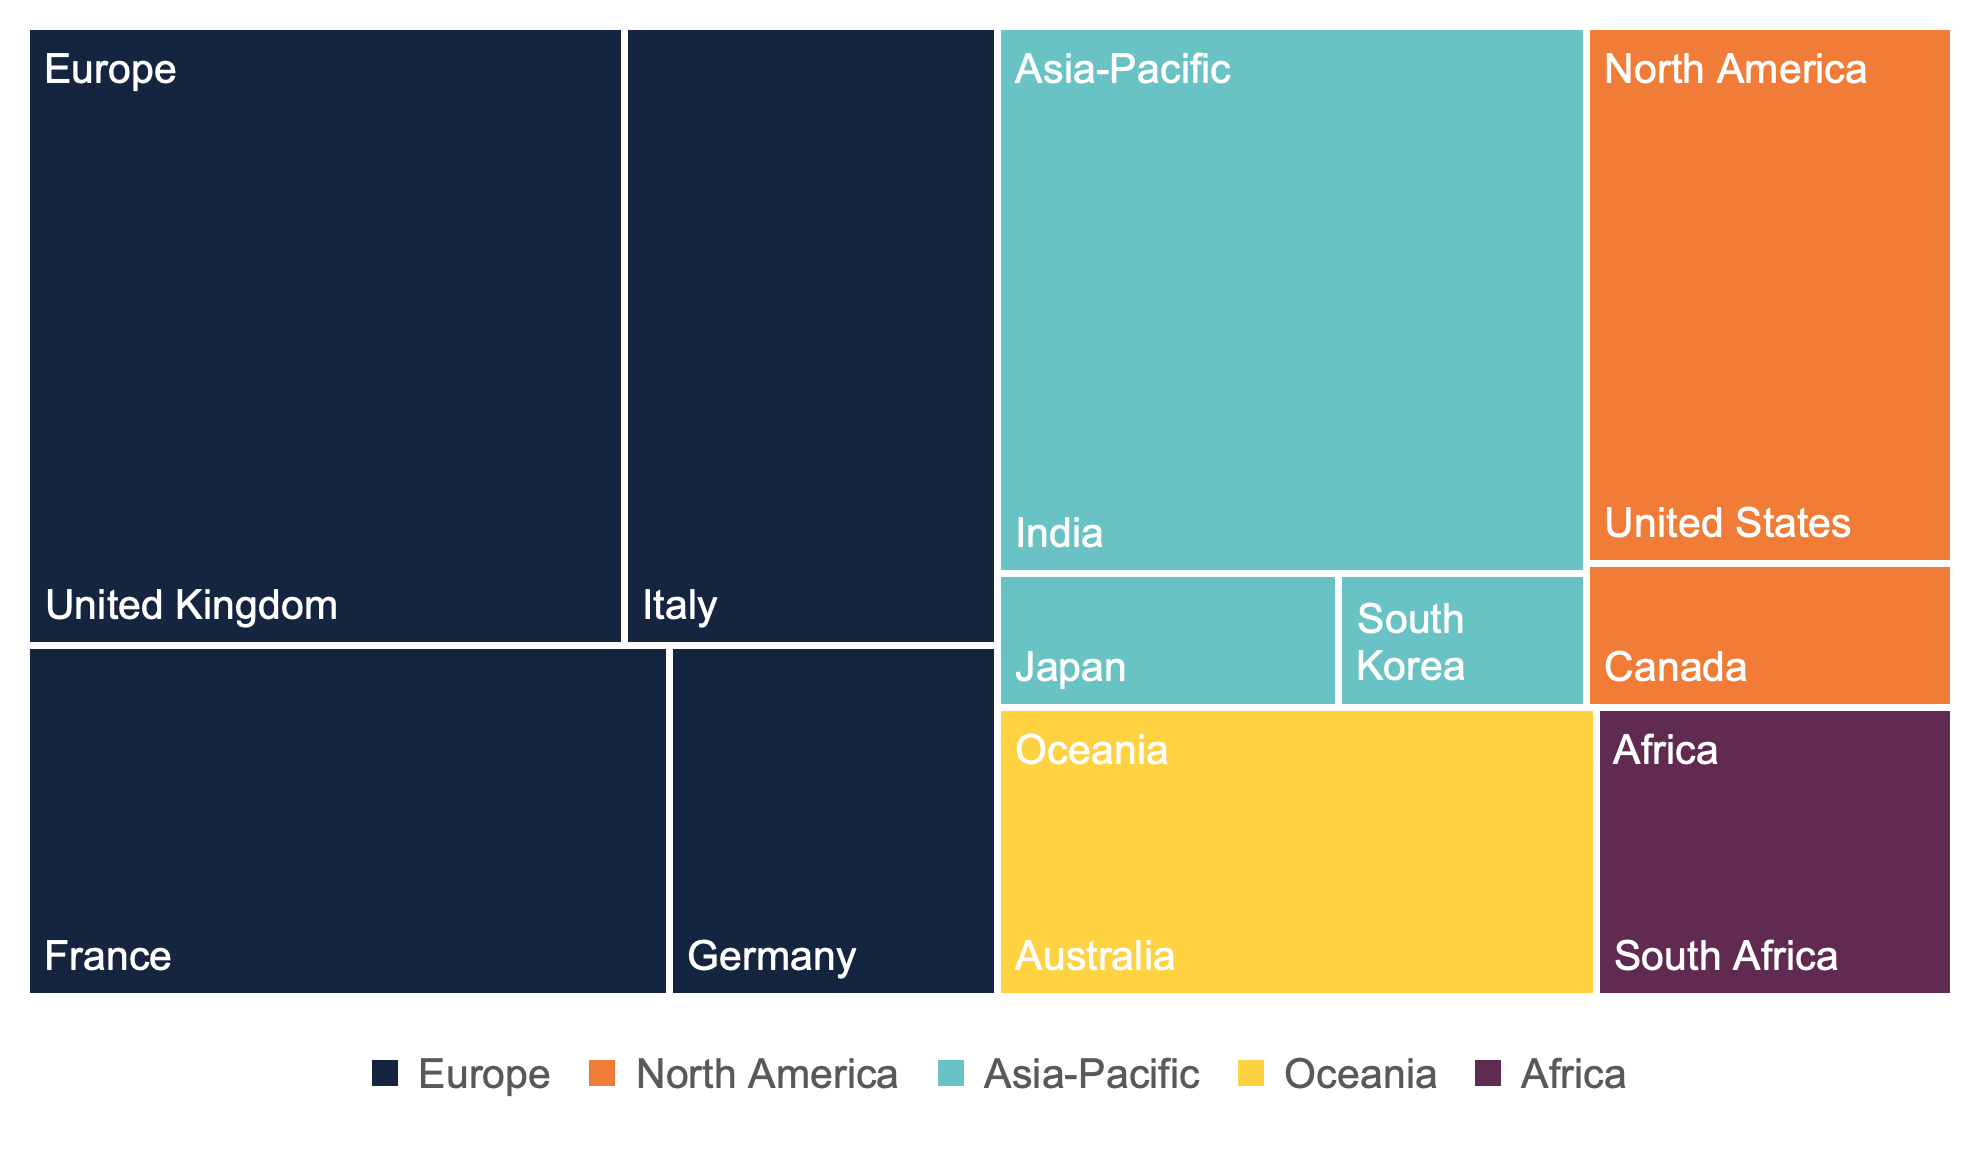 Fossil fuel subsidies from the G7 and the four countries invited to join the 2021 G7 (Australia, India, South Africa and South Korea) in 2019.